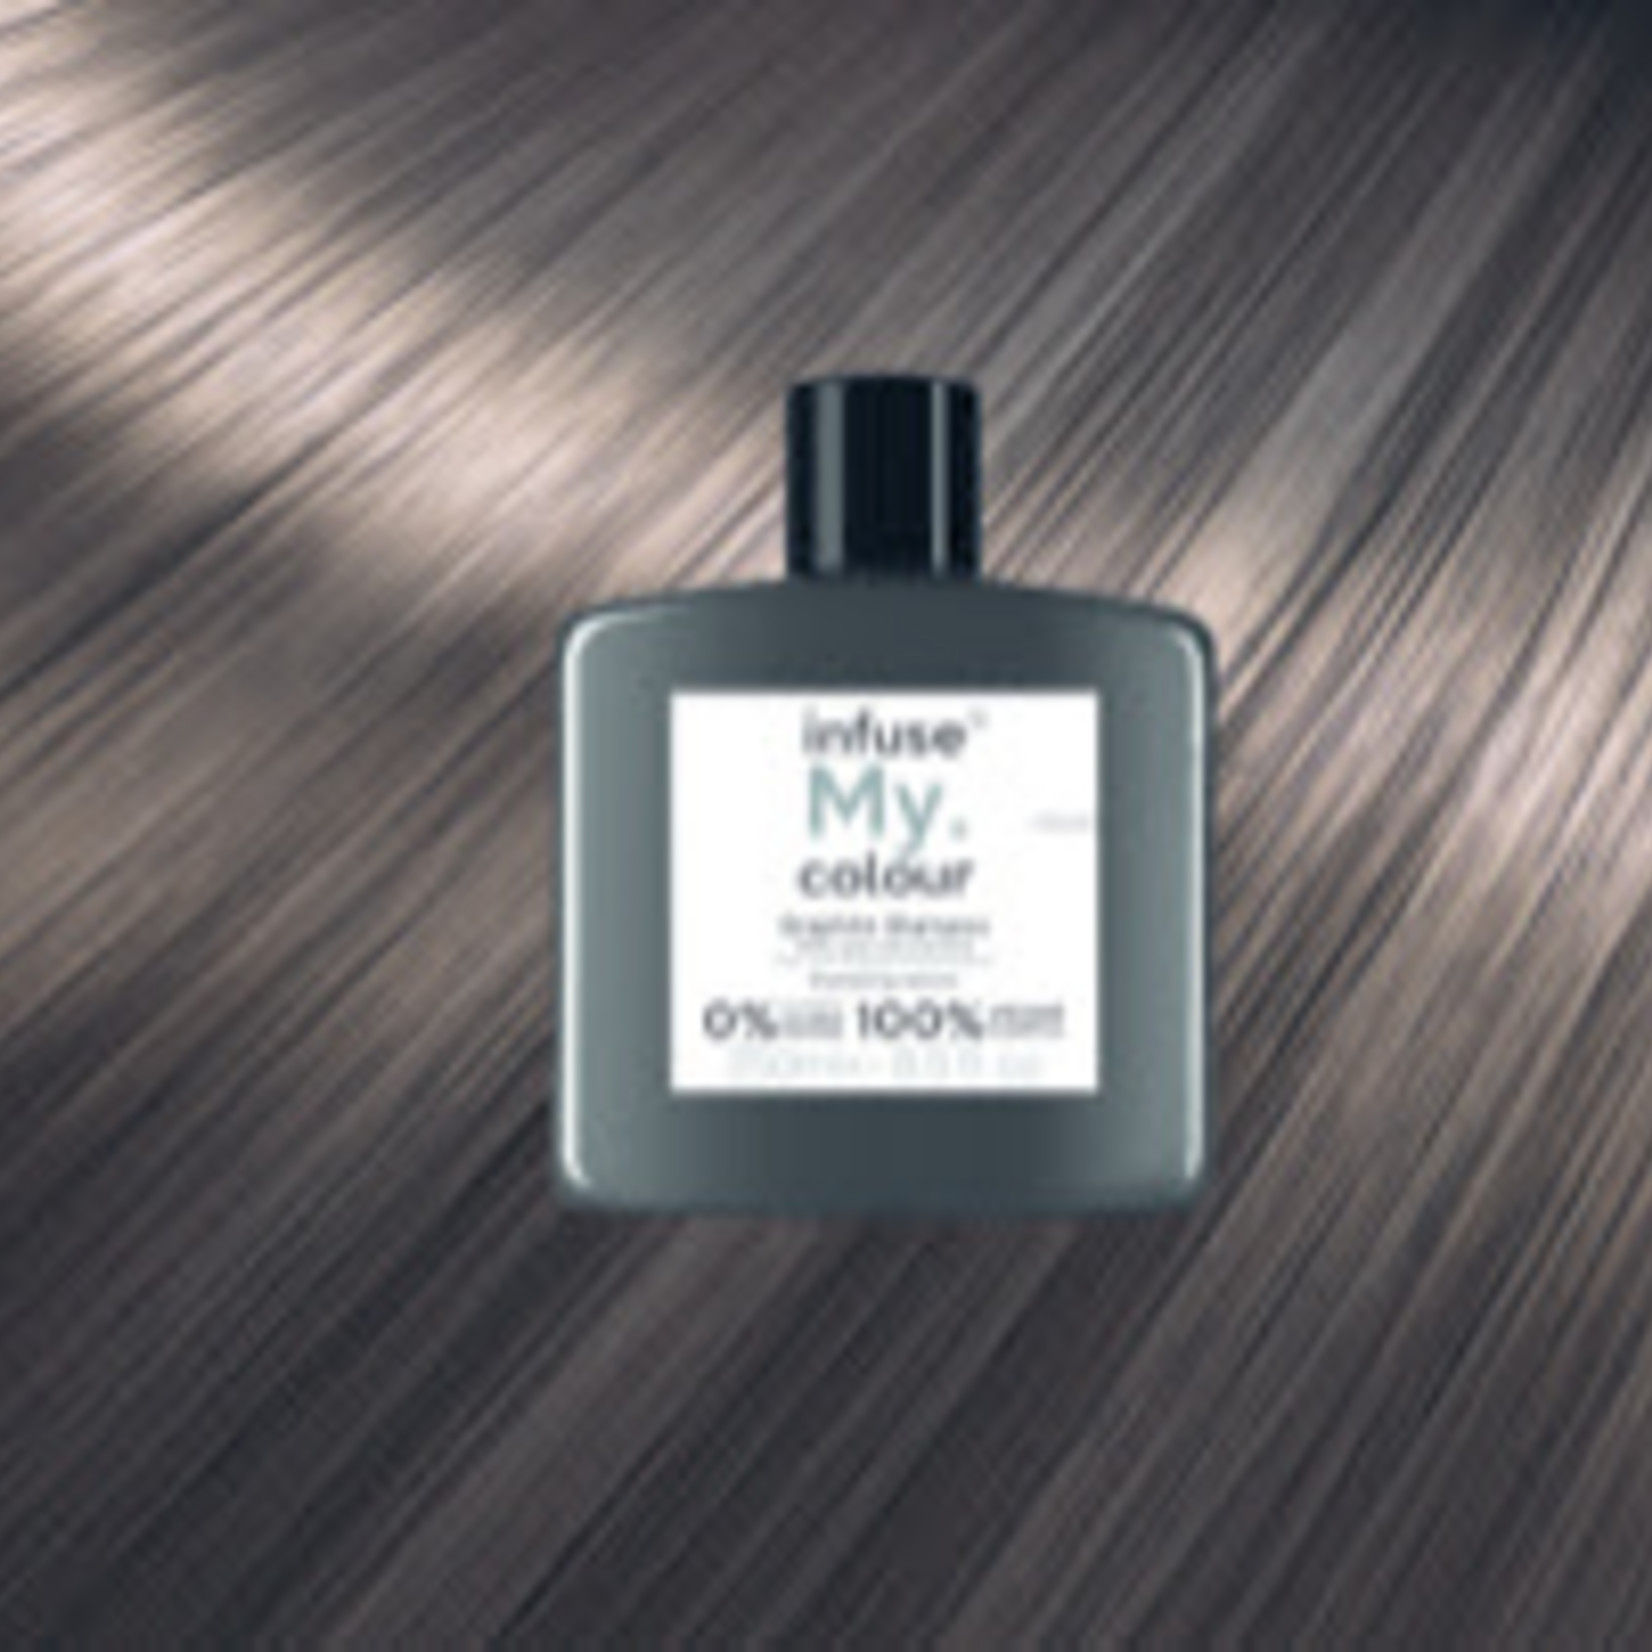 My.Haircare infuse My. Colour Graphite 250ml